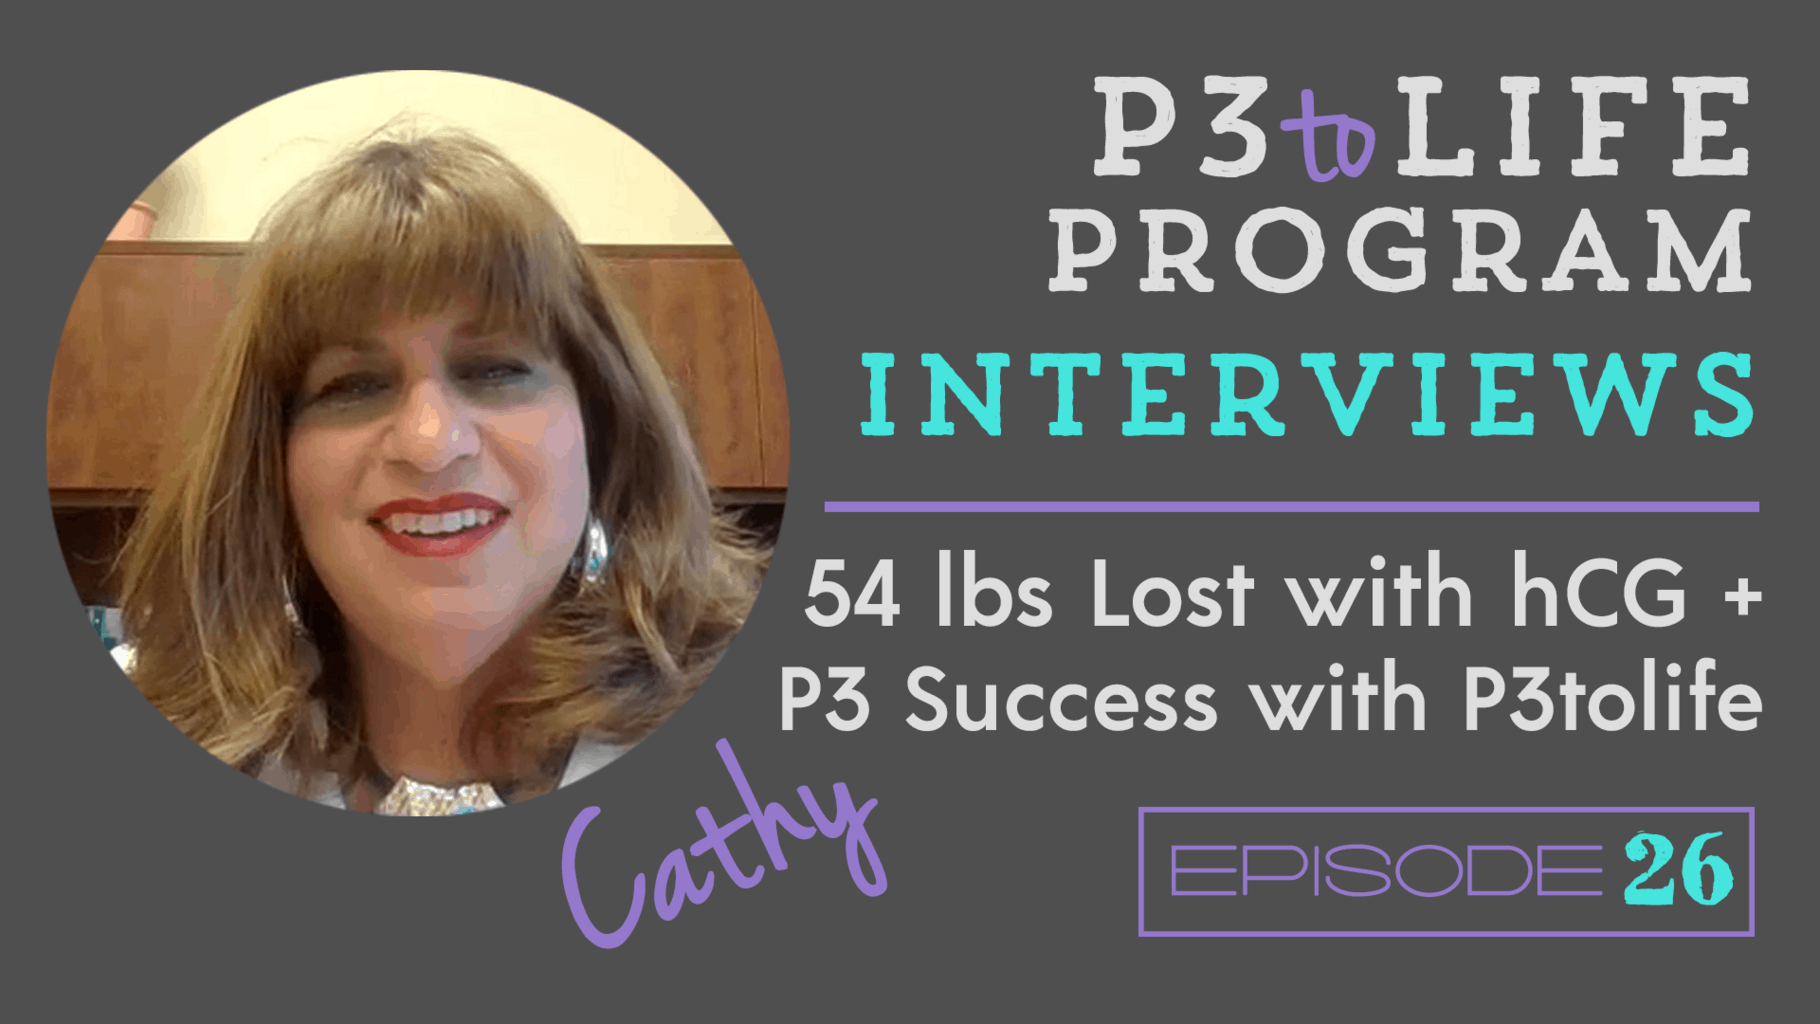 phase-3-success-p3tolife-54-lbs-lost-hcg-diet-interview-episode-26-cathy